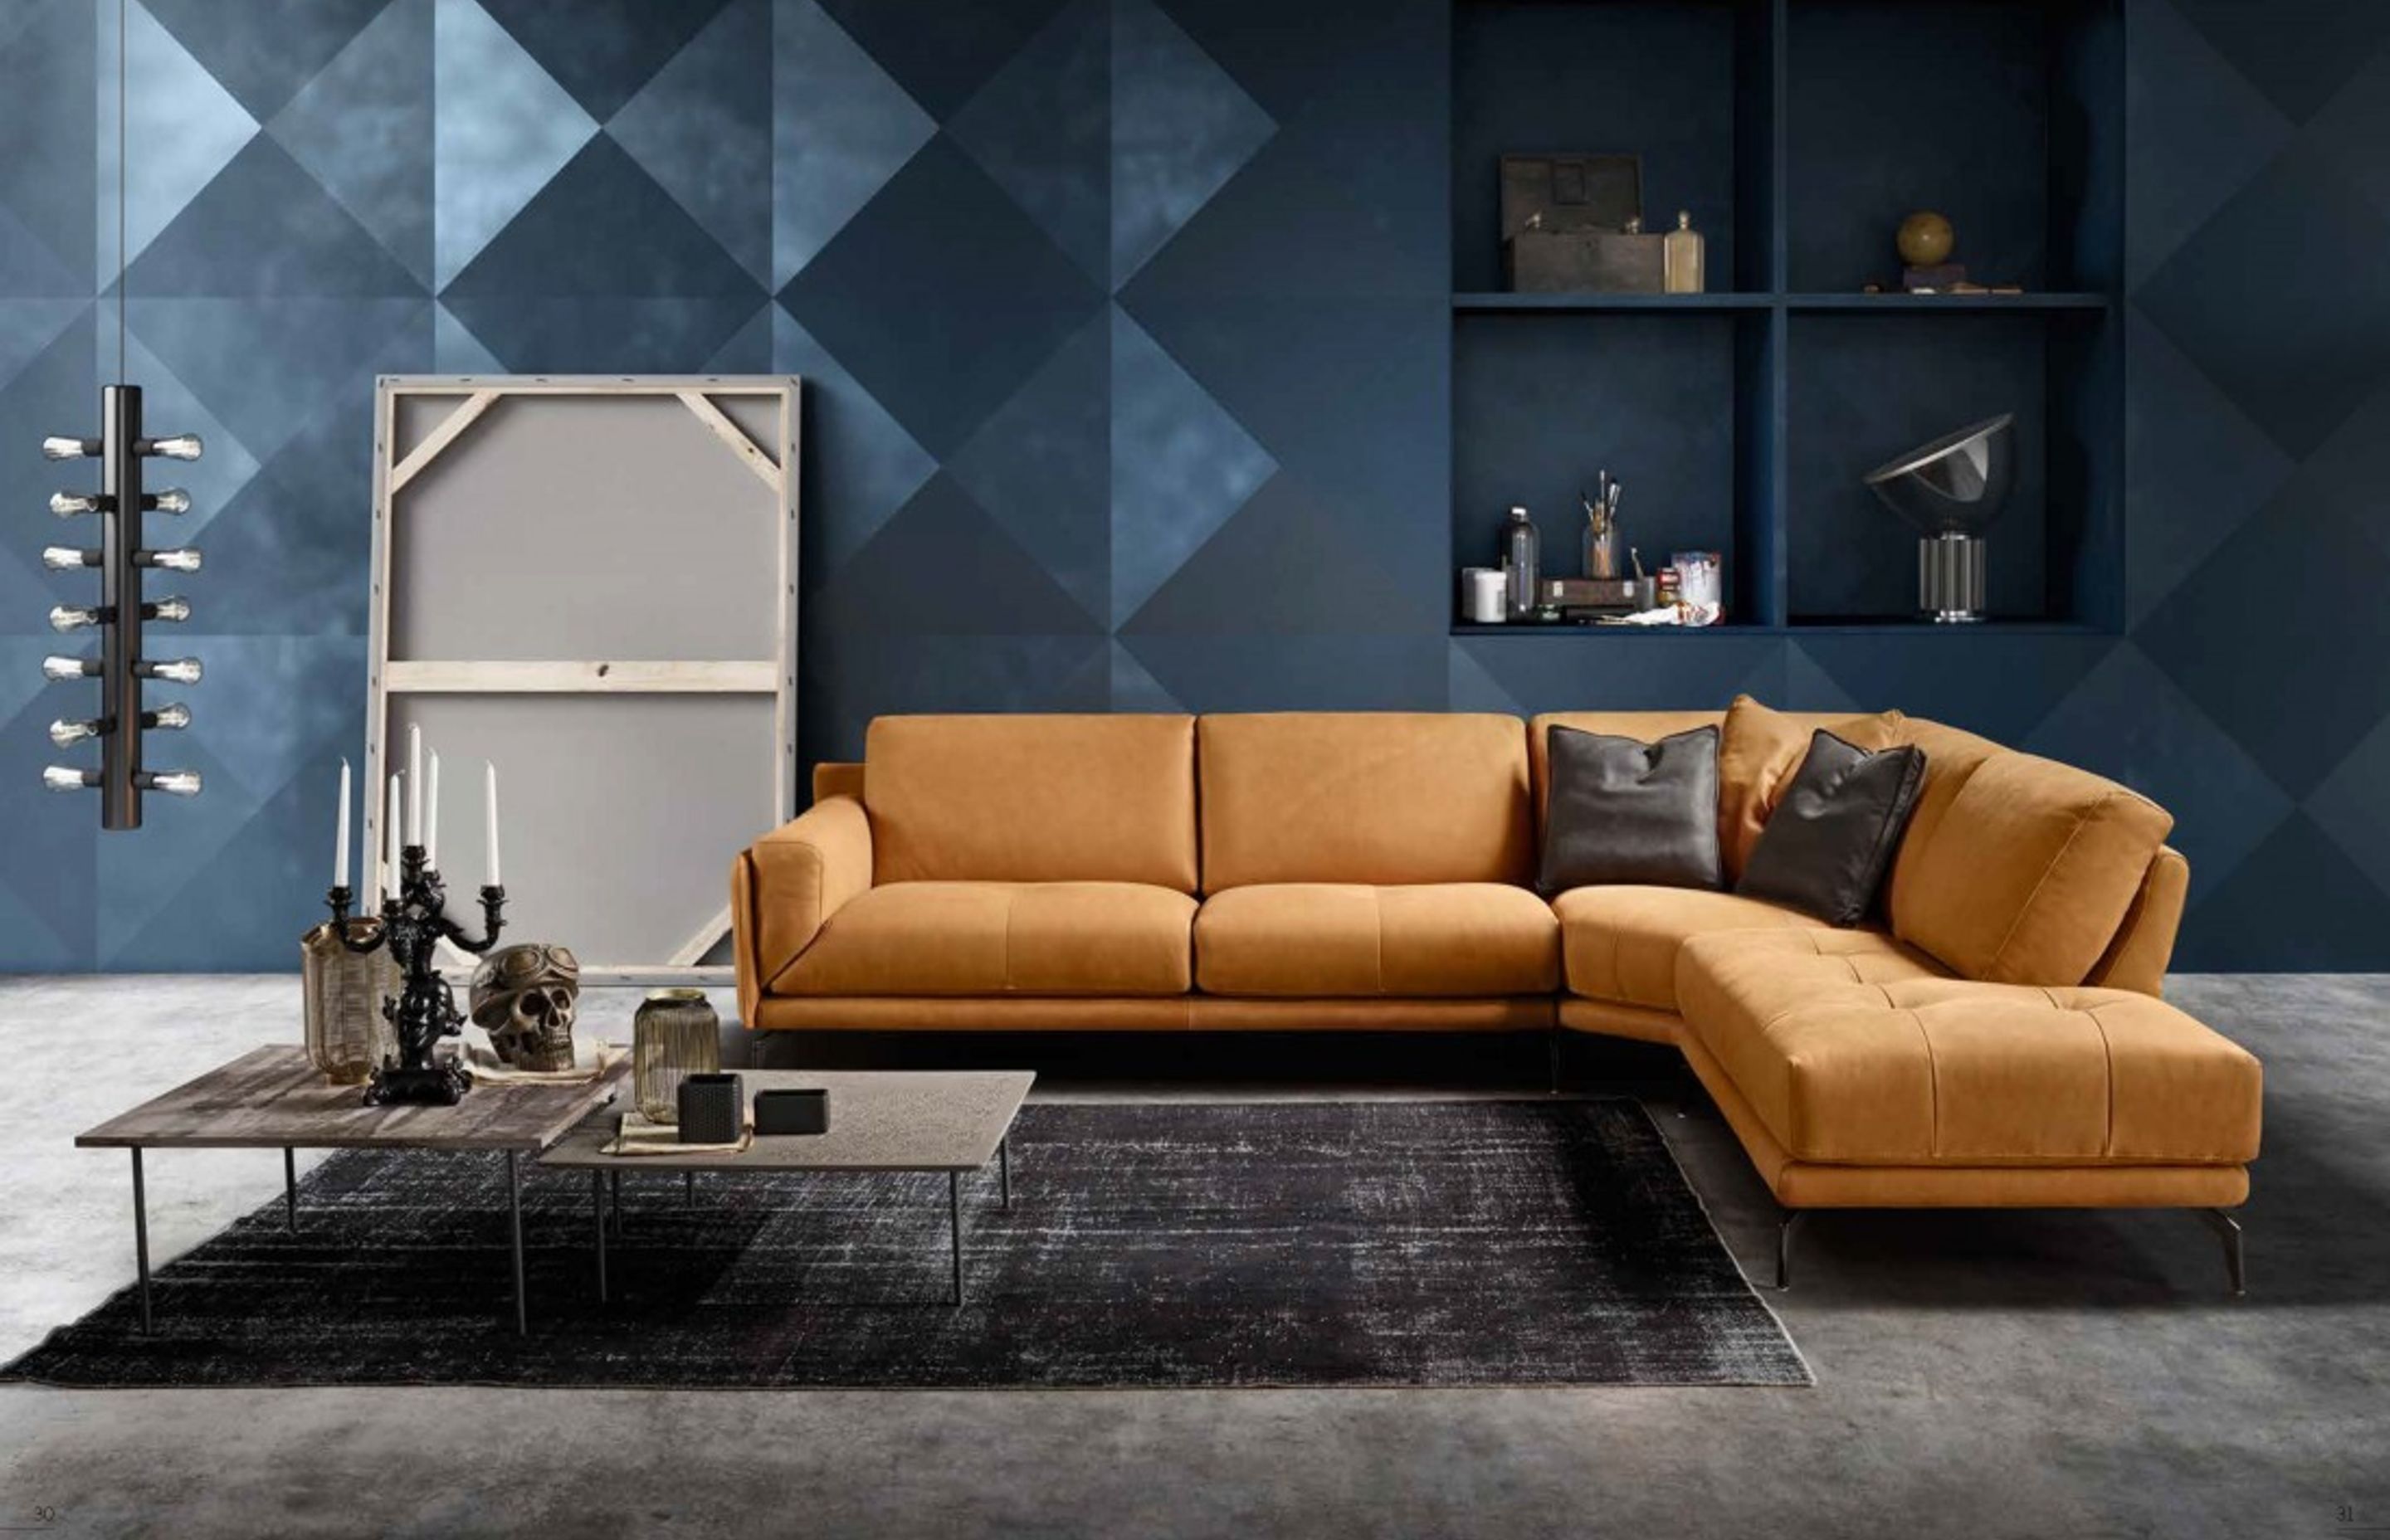 The Glamour Suite by Saporini was launched at the Salone del Mobile in Milan this year